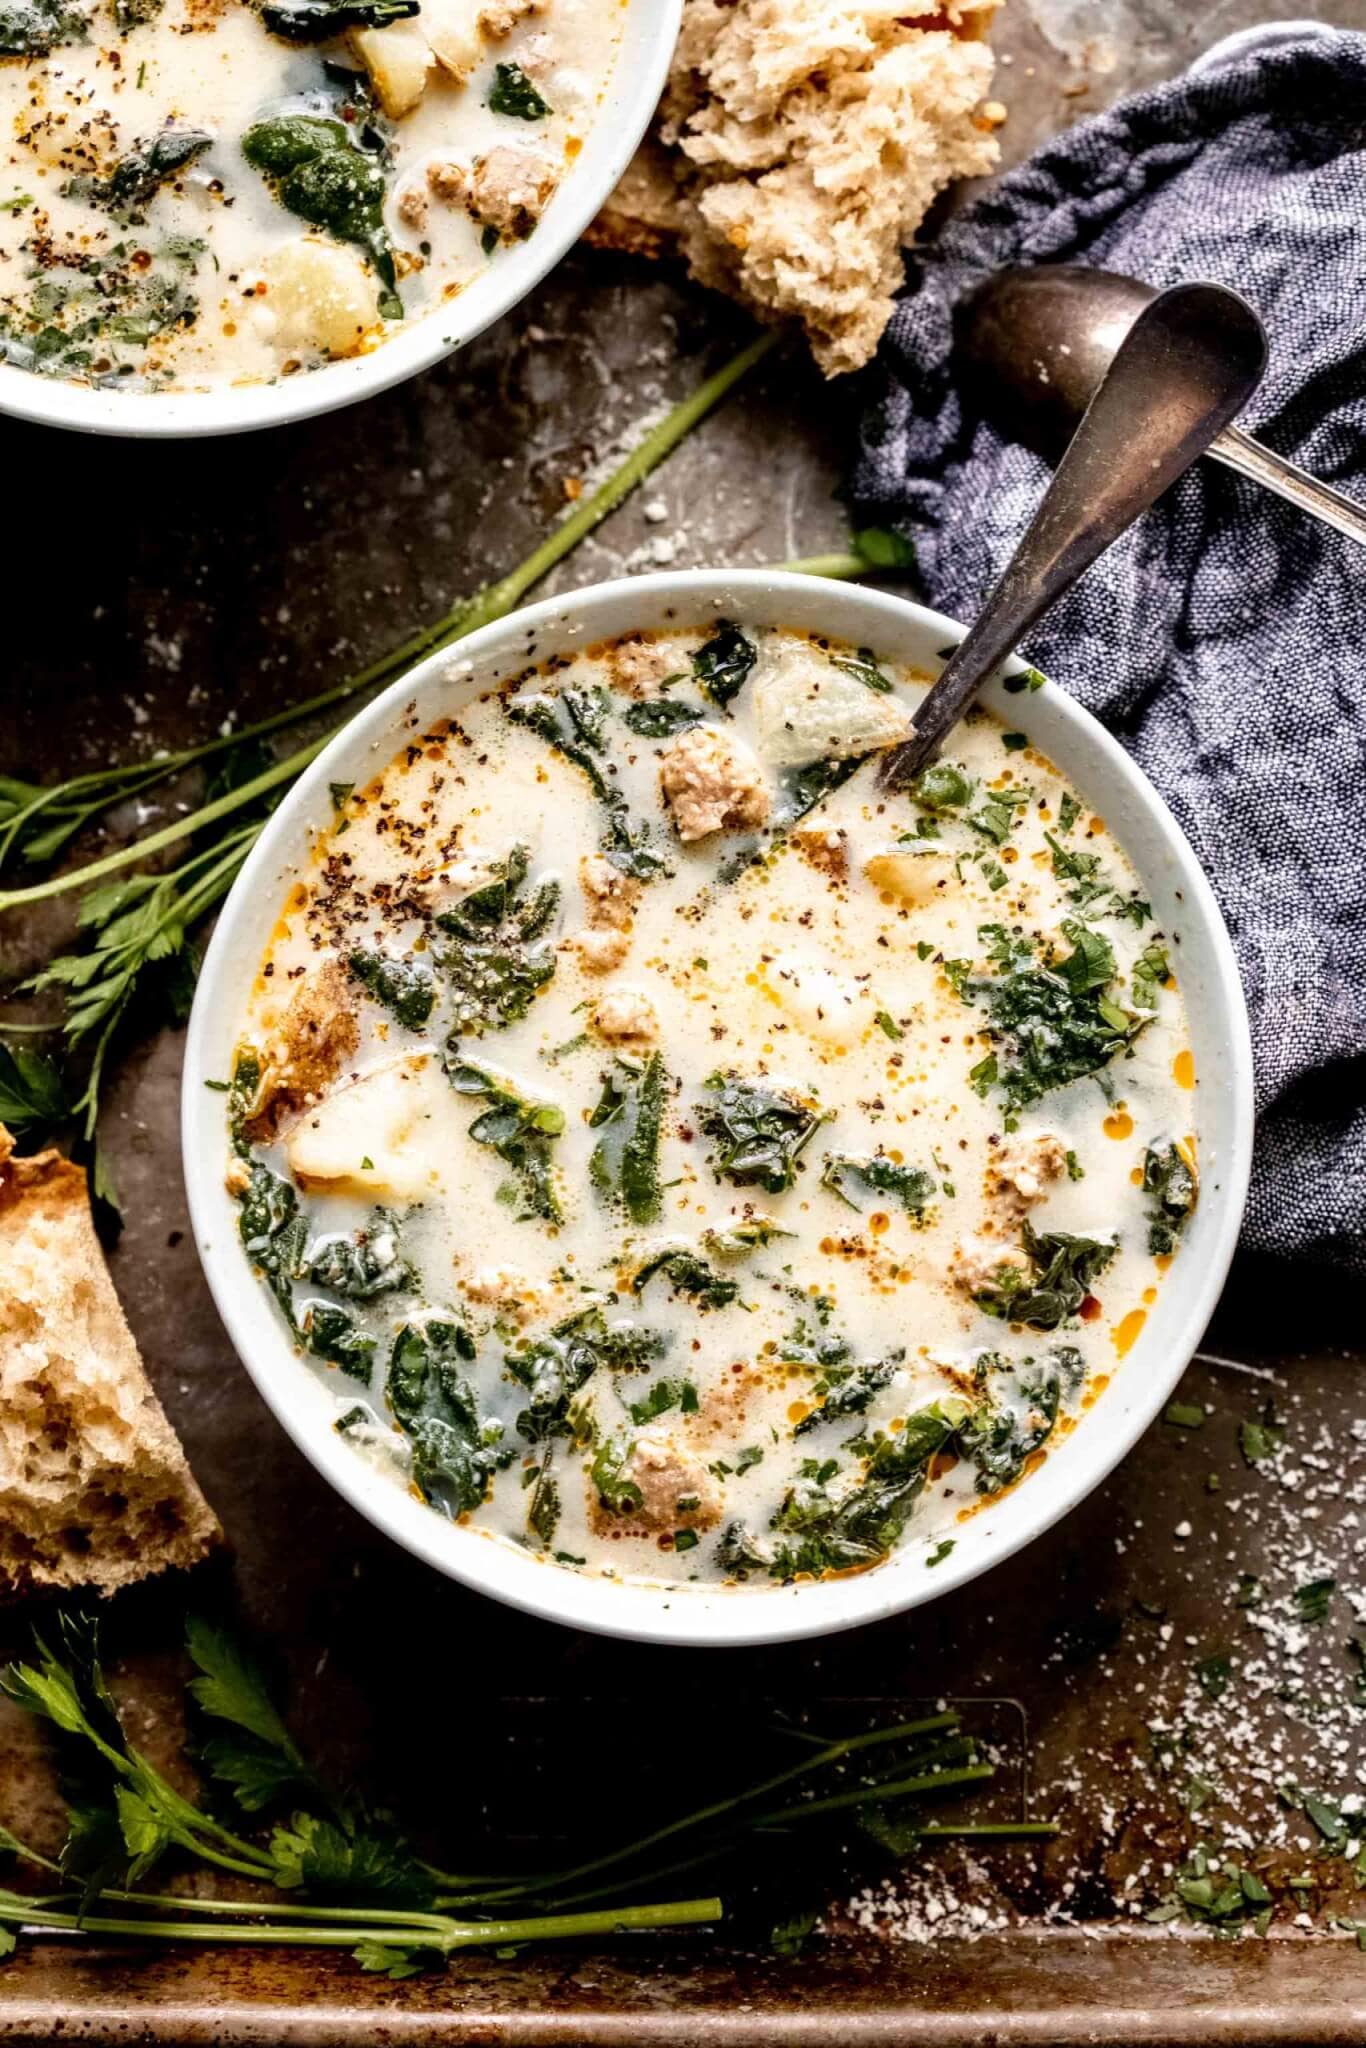 Two bowls of zuppa toscana on serving tray next to pieces of crusty bread.